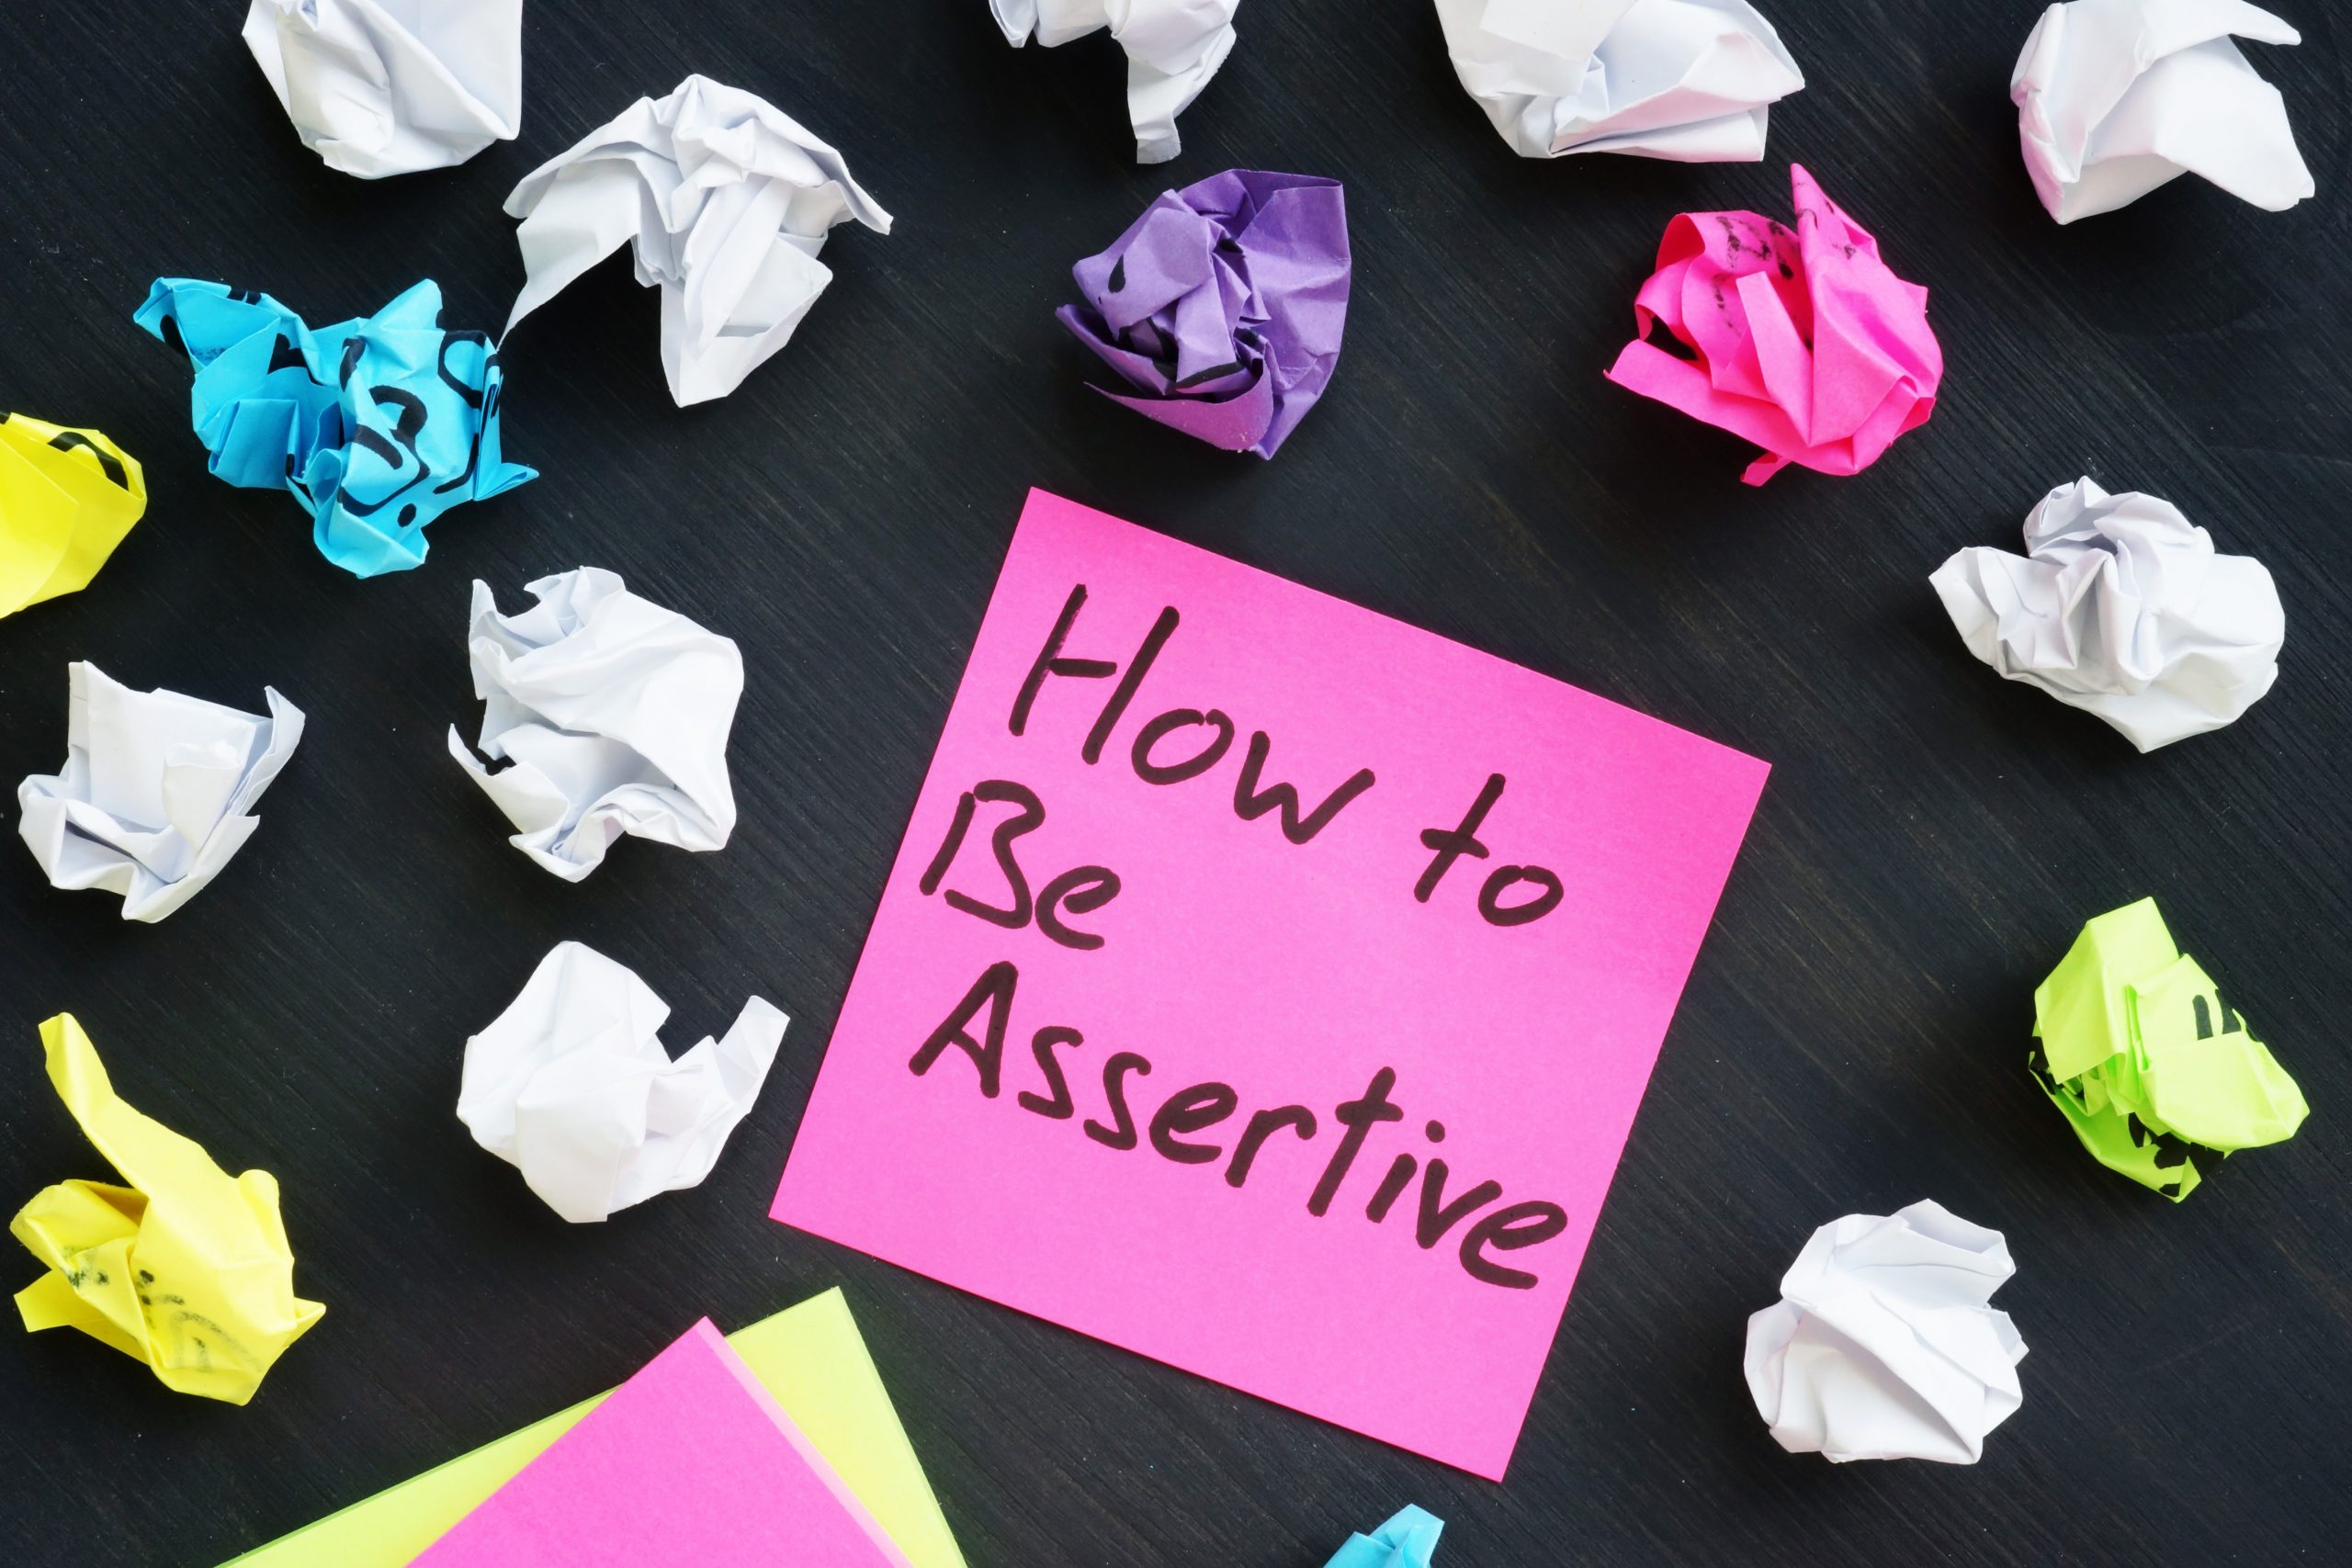 Assertive Communication: 5 Keys to Speaking Your Truth